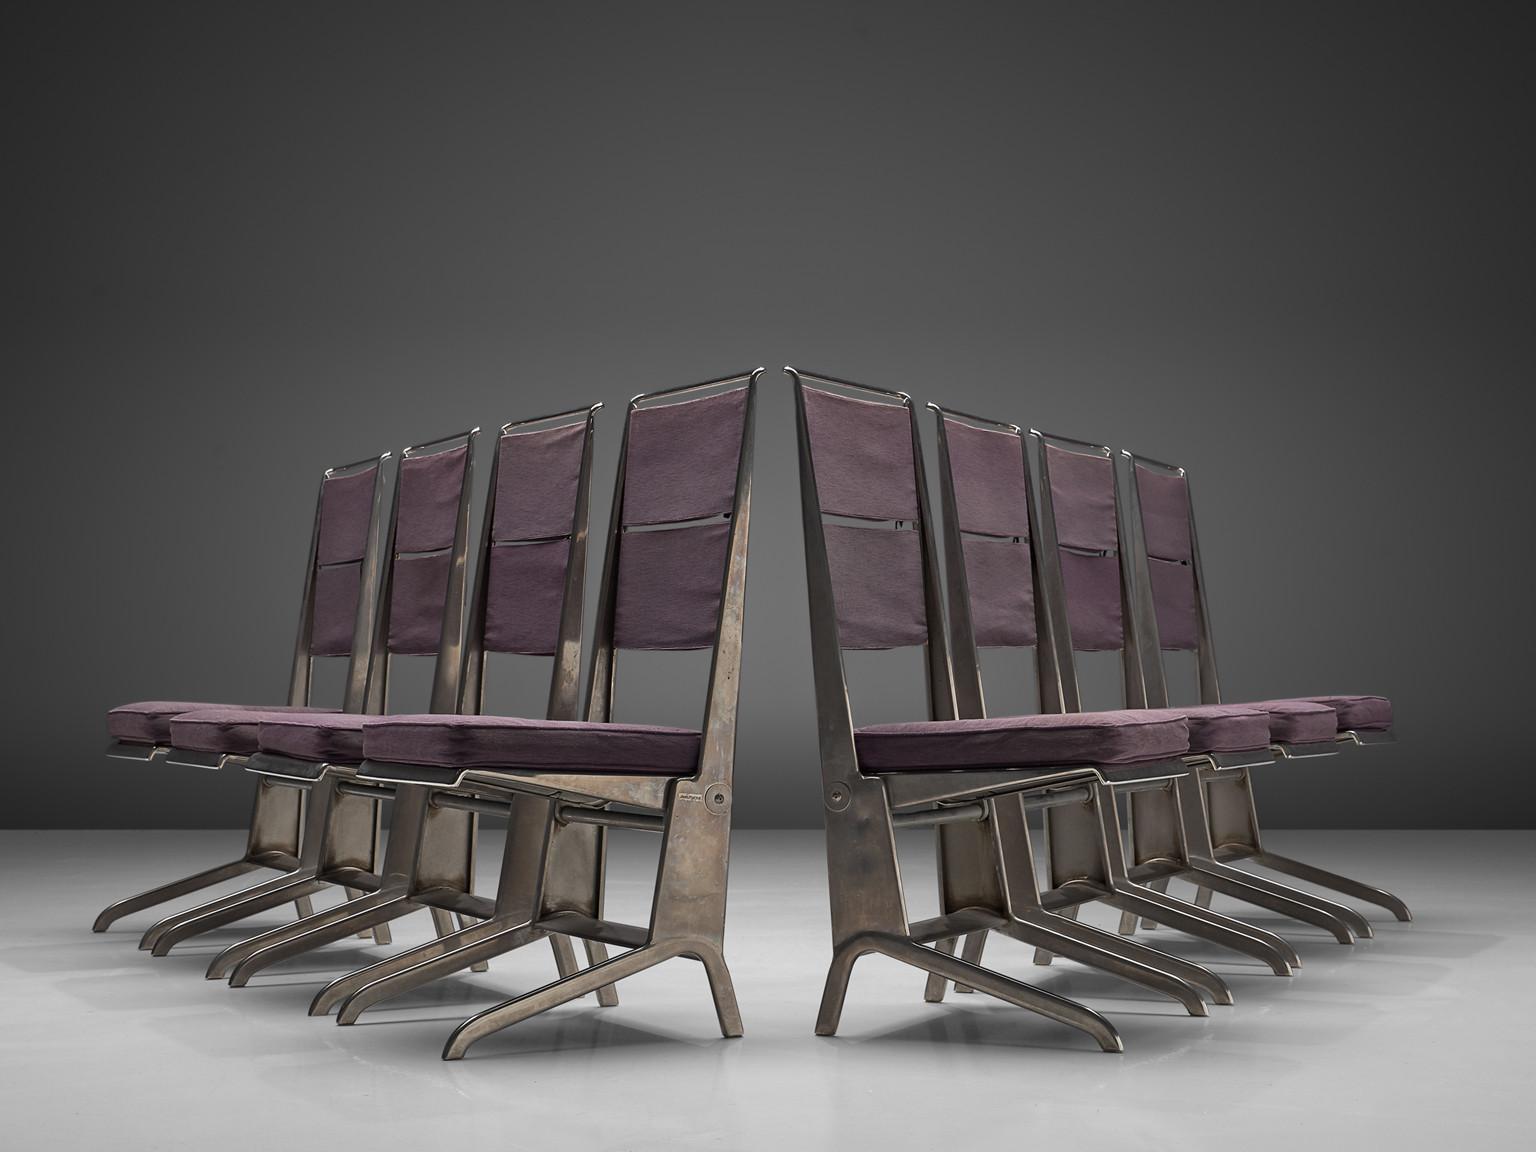 Jean Prouvé for Tecta, reclining chairs, steel and canvas, France, design circa 1930, production, 1983.

This extremely rare set of chairs was designed by Jean Prouvé in 1930. Originally only eight of these were produced, for Prouvé's sister. In